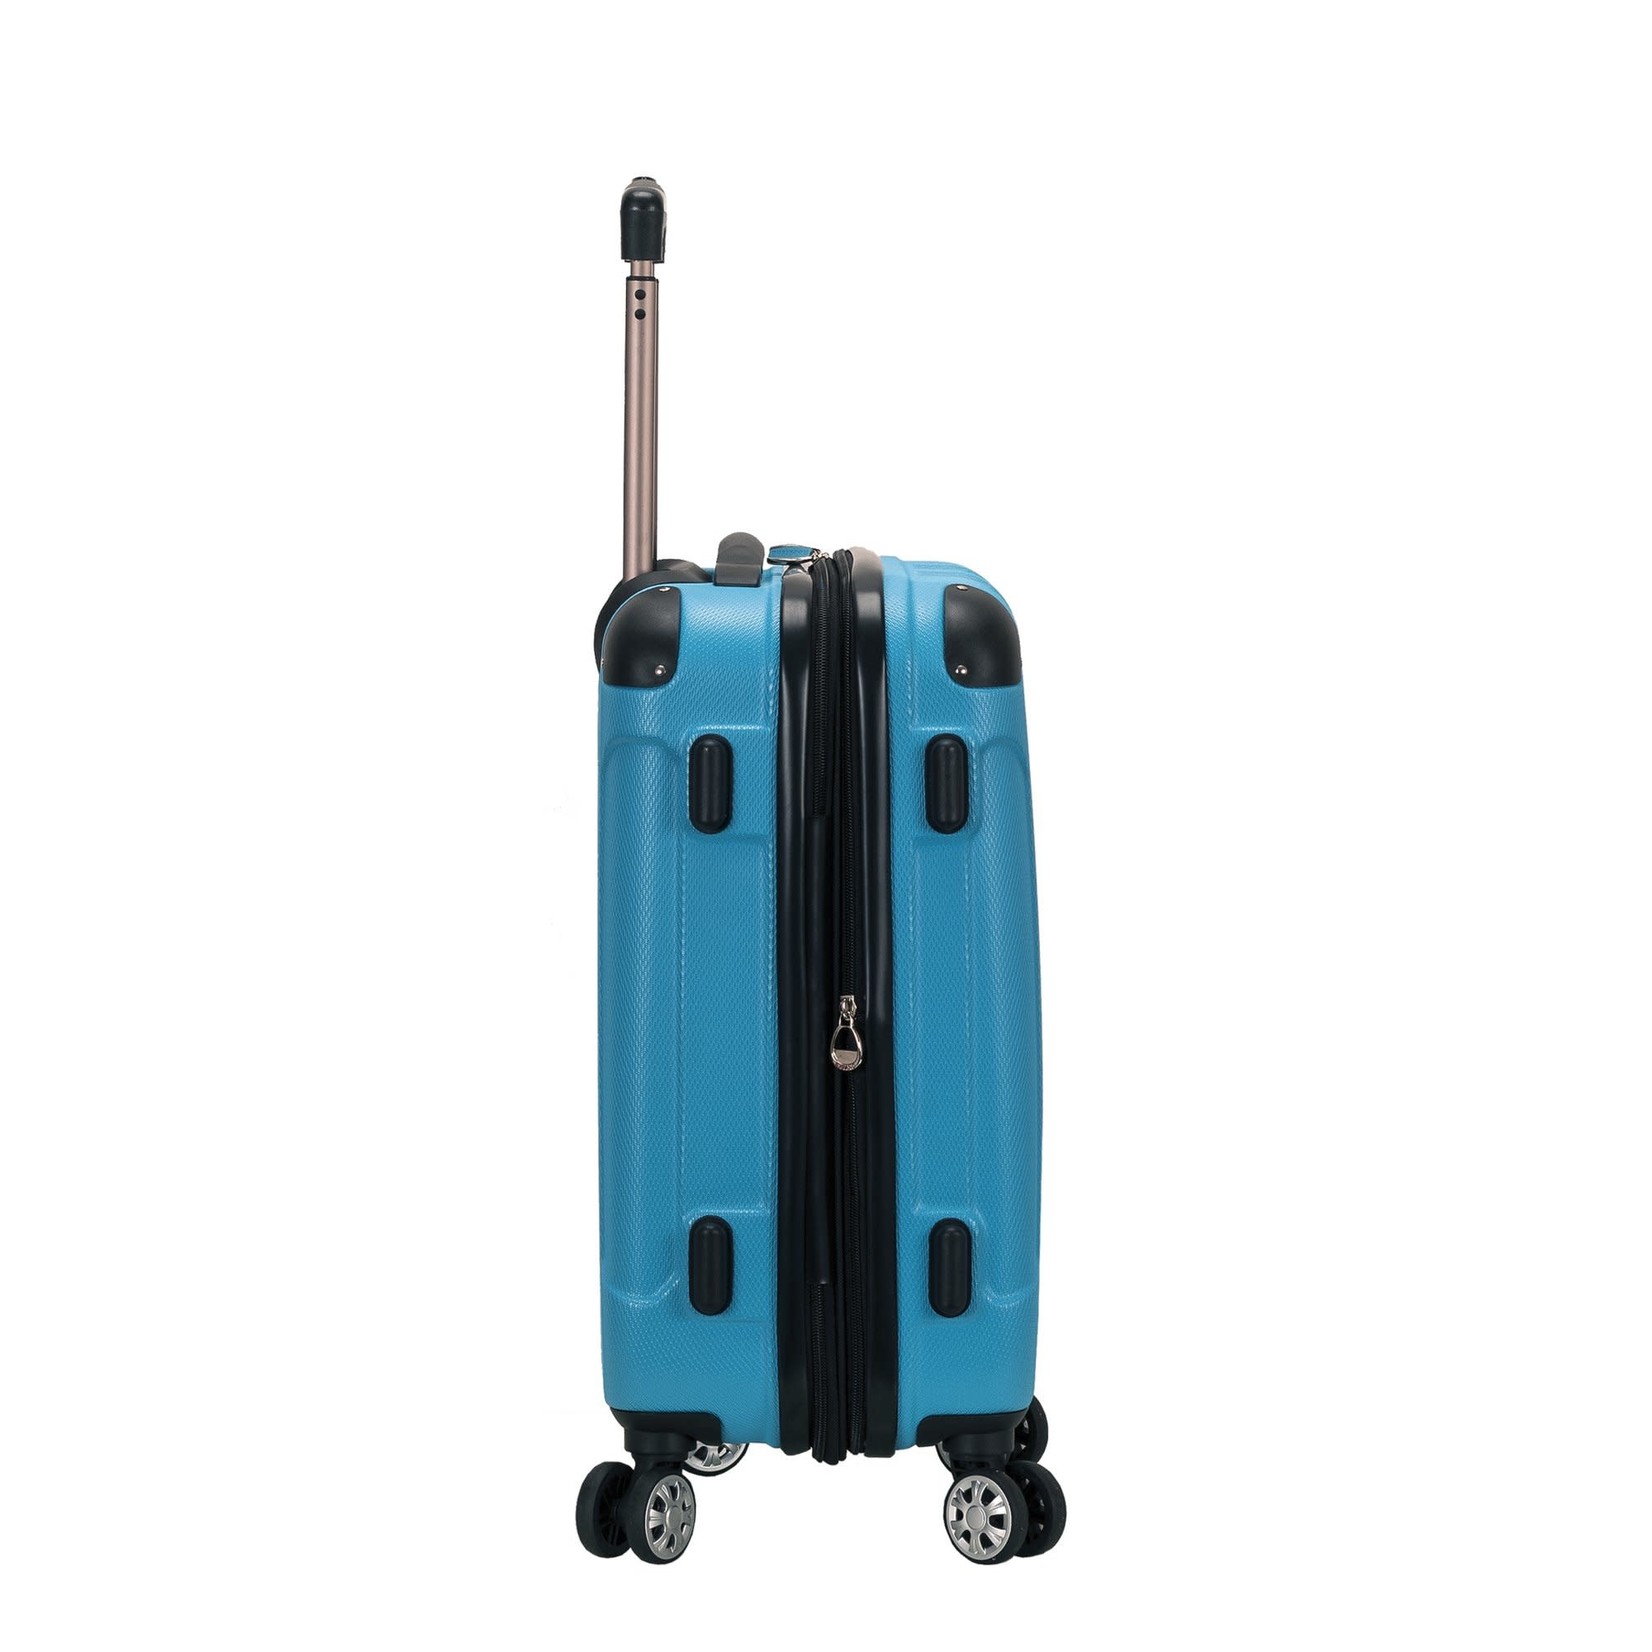 Rockland Sonic 20 Hardside Carry-on Spinner - Turquoise